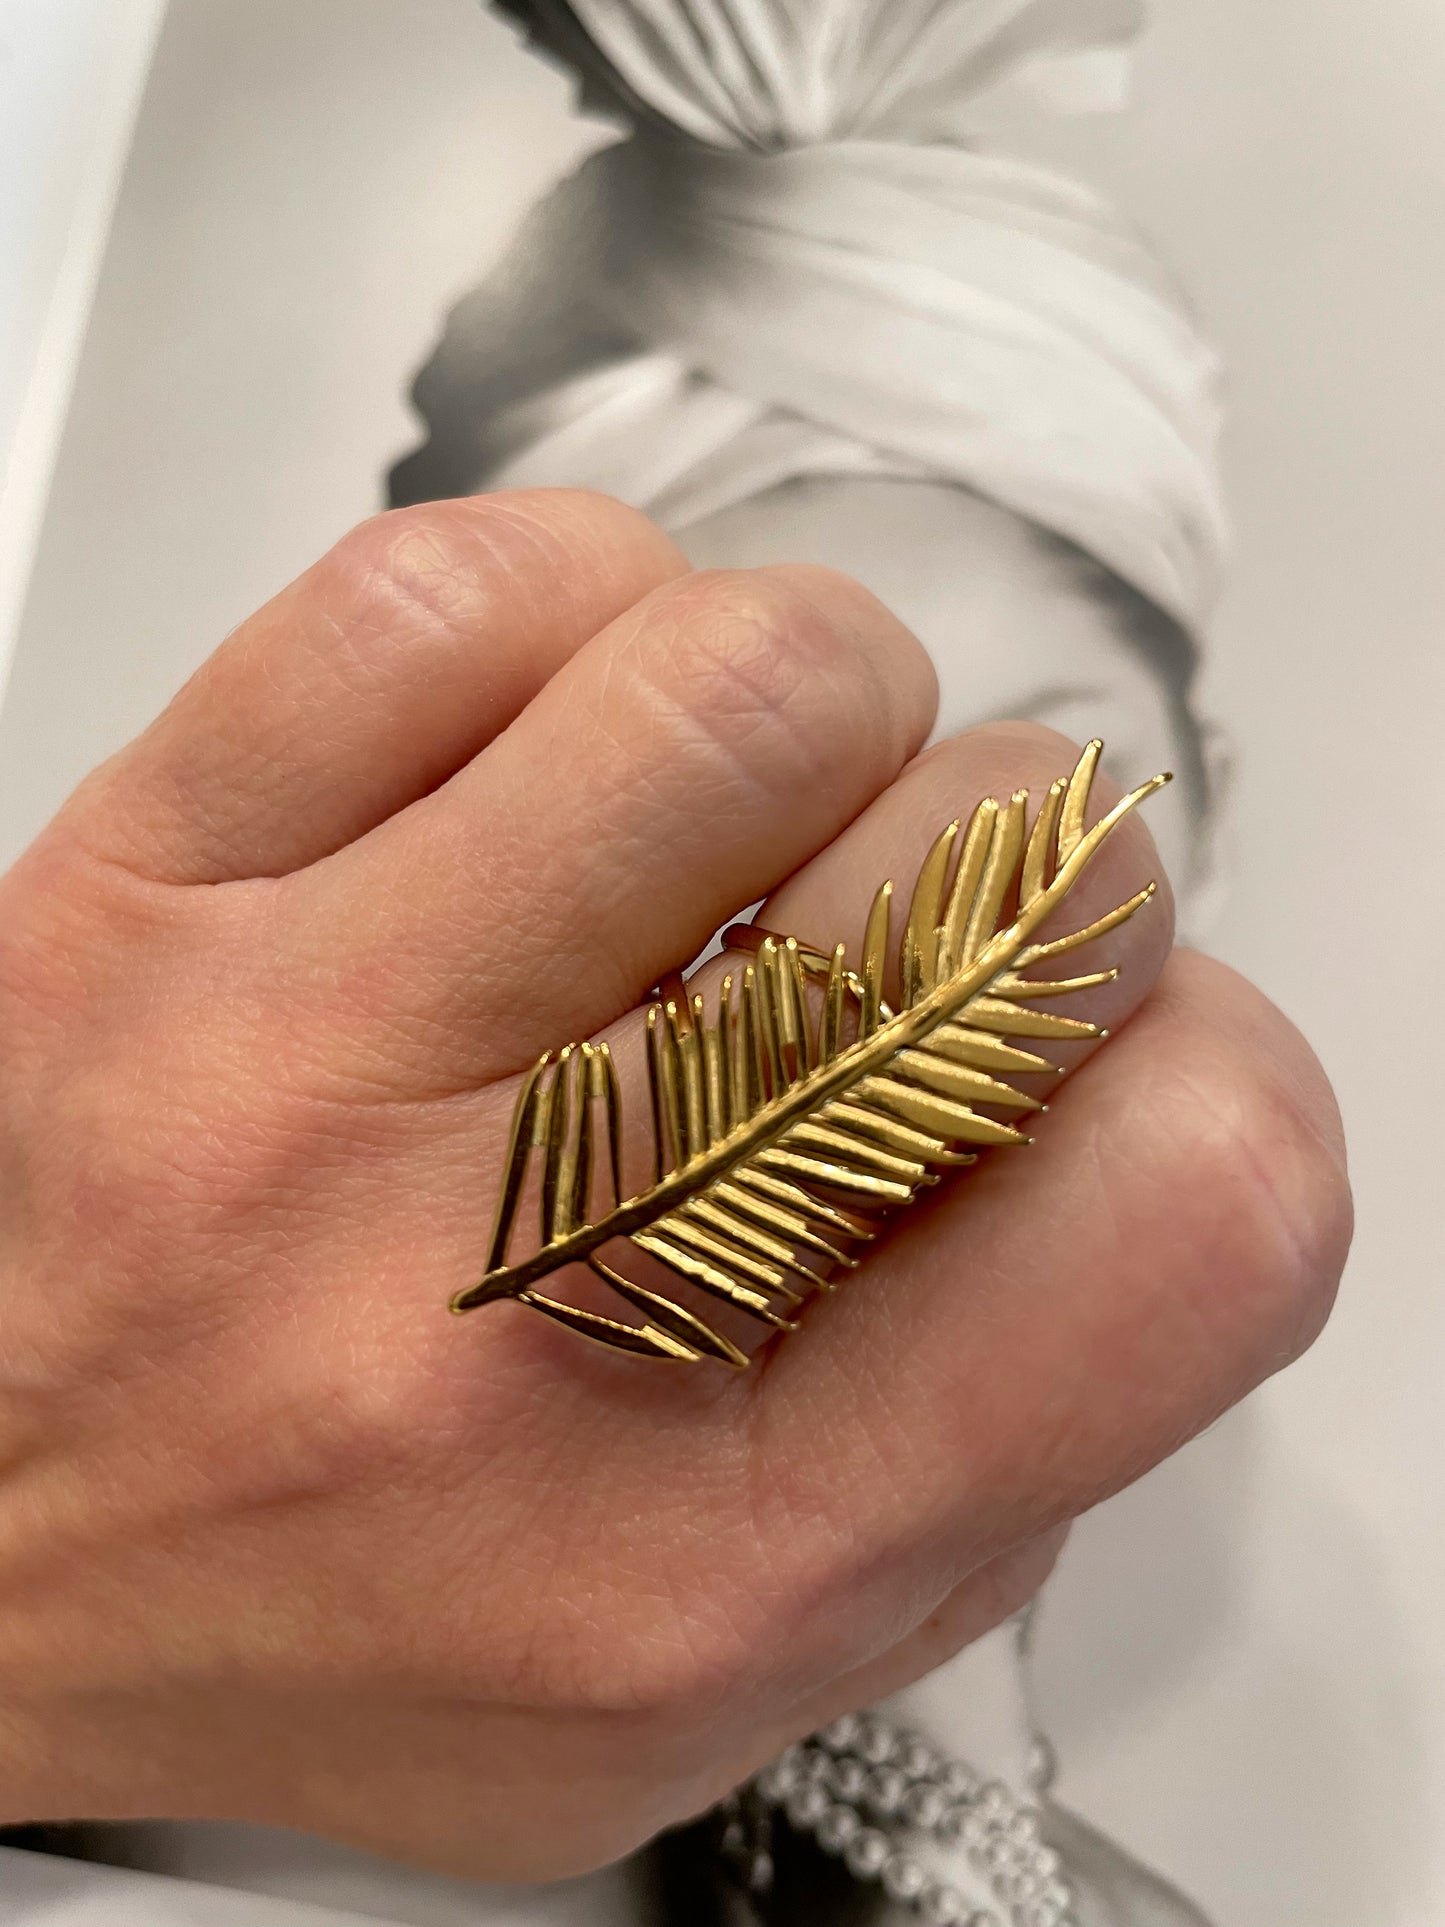 The feather ring